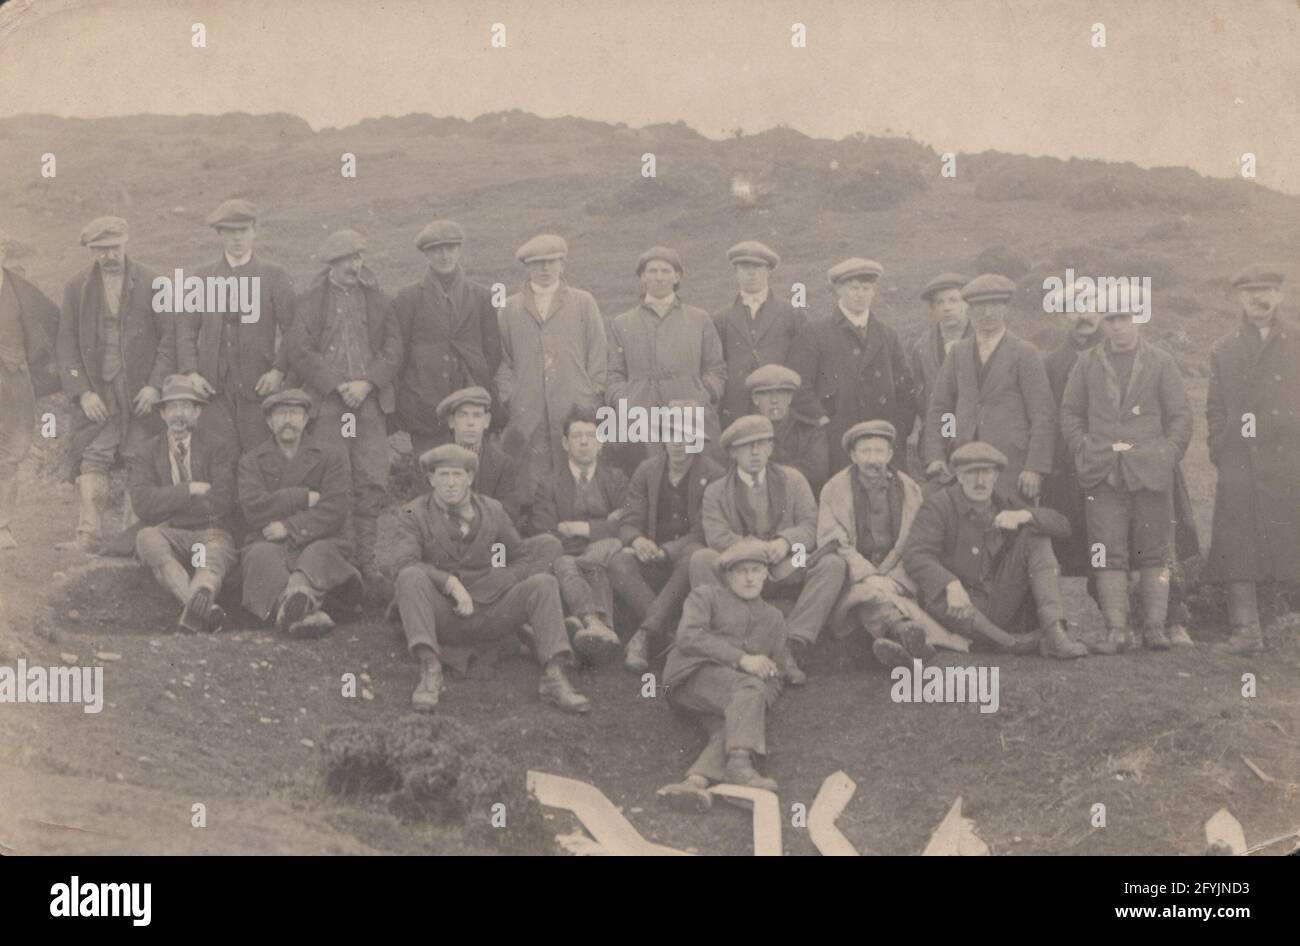 Vintage early 20th century photographic postcard showing a large group of working men wearing caps in a remote location. Stock Photo